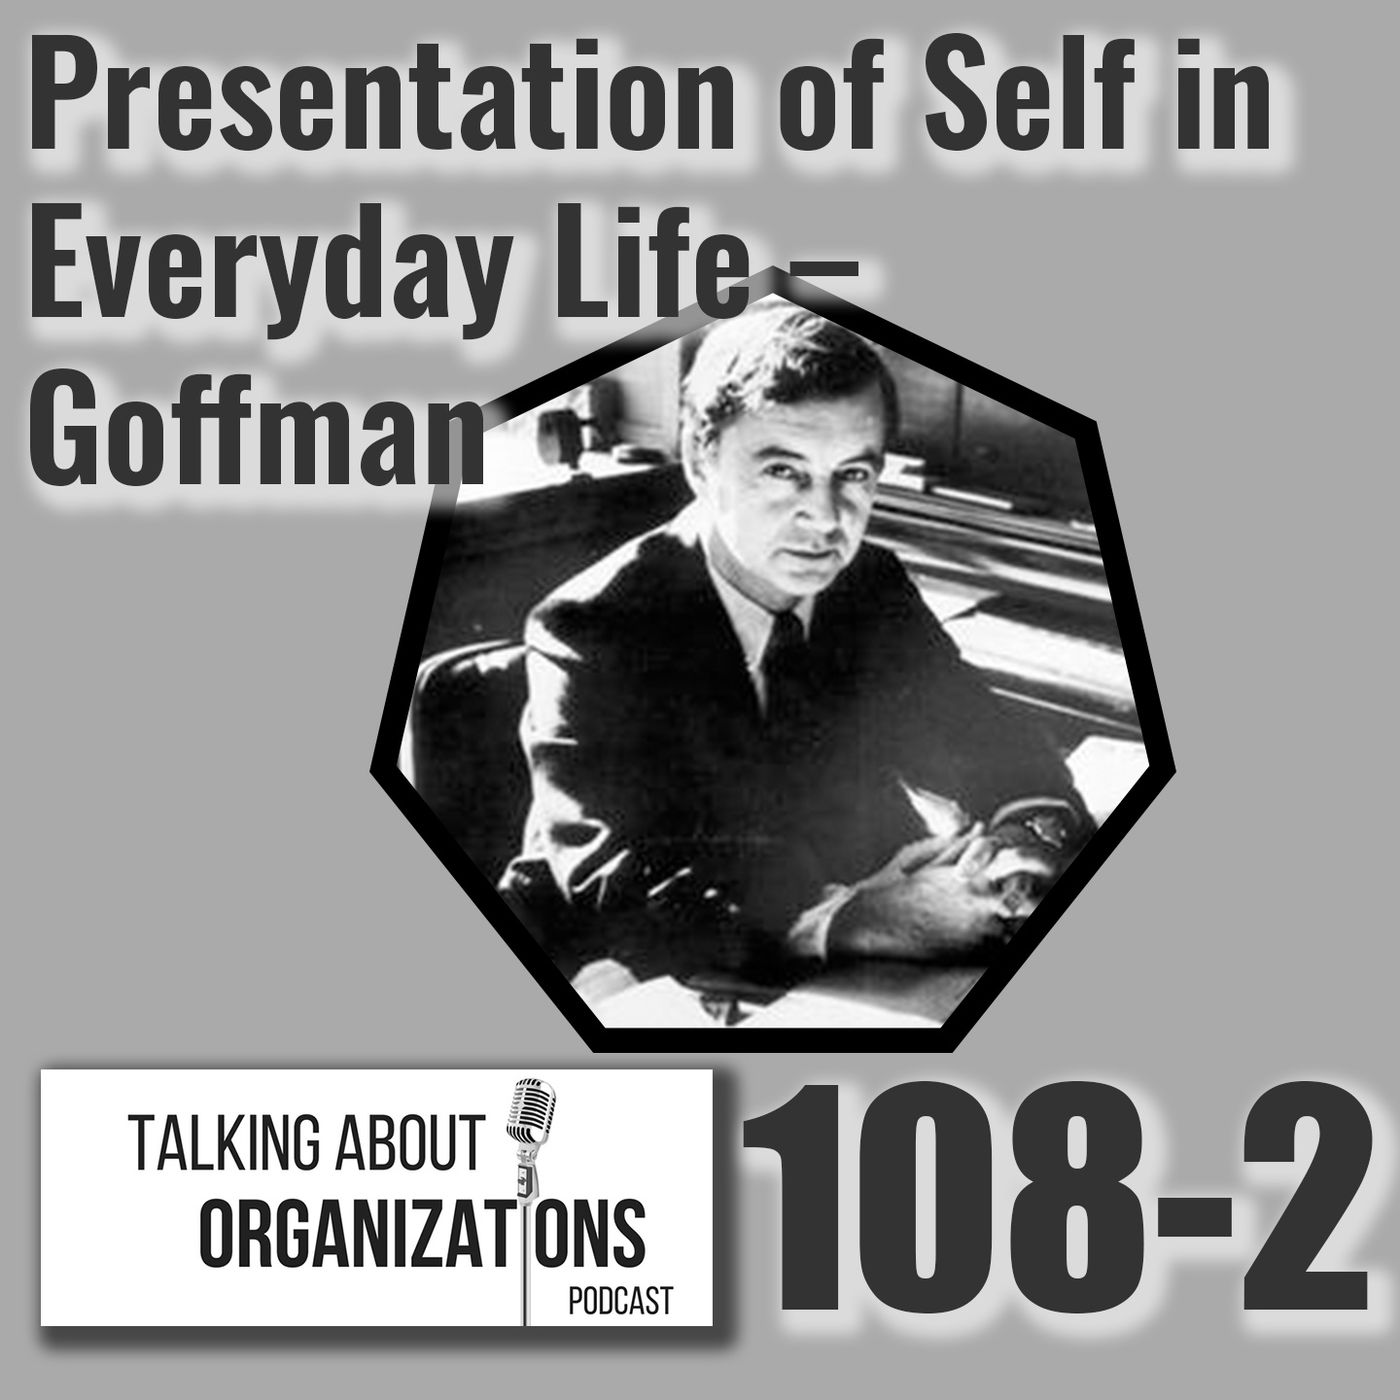 108: Presentation of Self in Everyday Life - Goffman (Part 2)